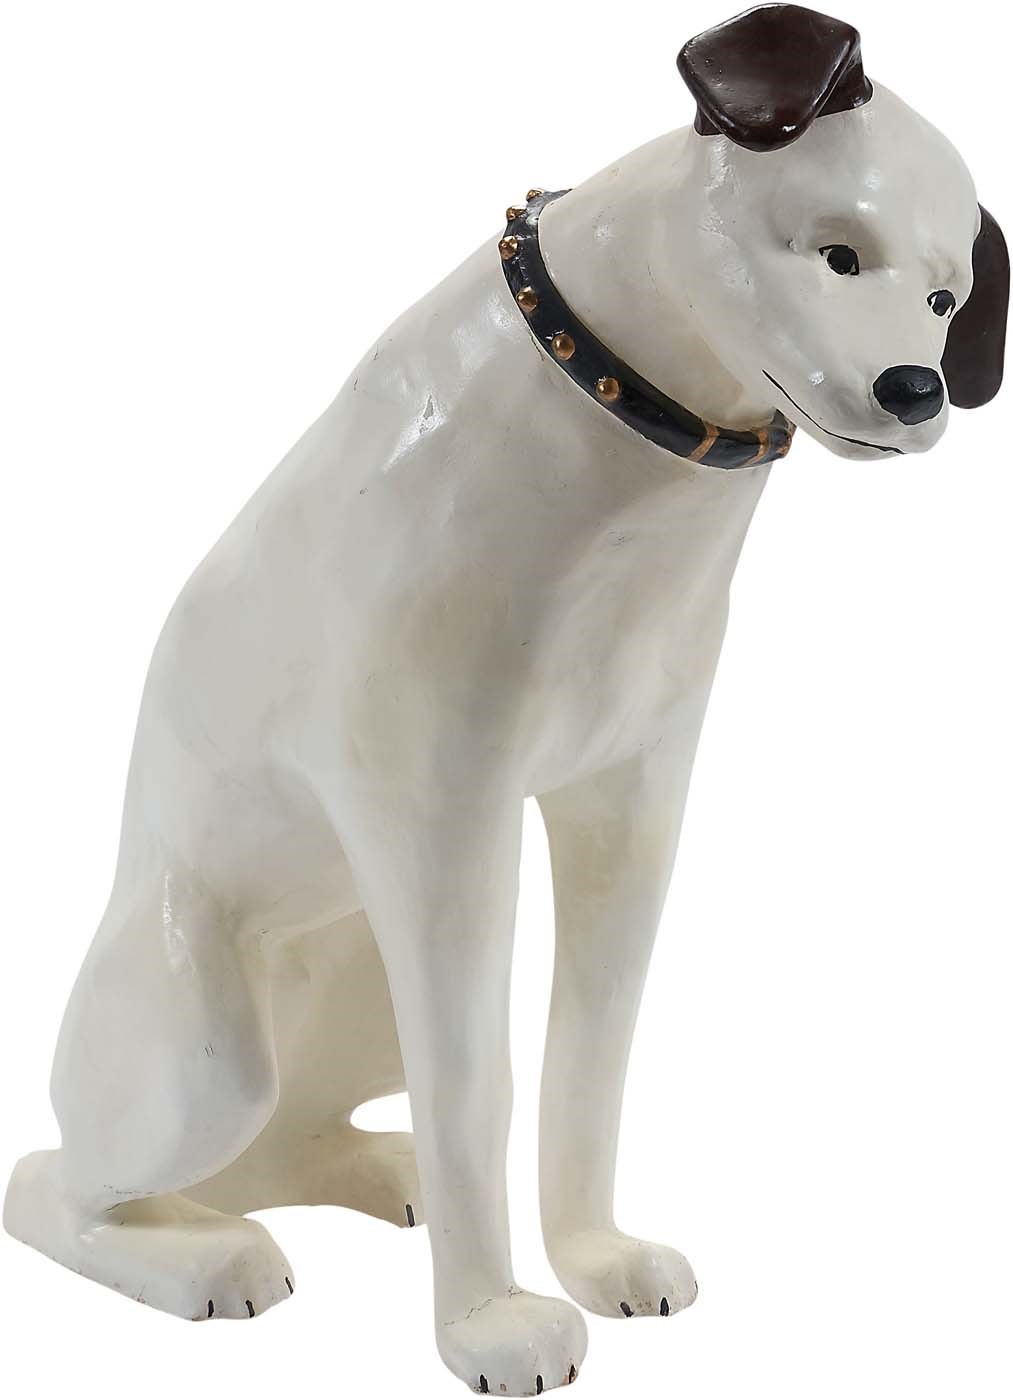 Rock 'N' Roll - 1930s "Nipper" RCA Victor Mascot Larger Than Life Store Display Advertising Statue (36" tall)